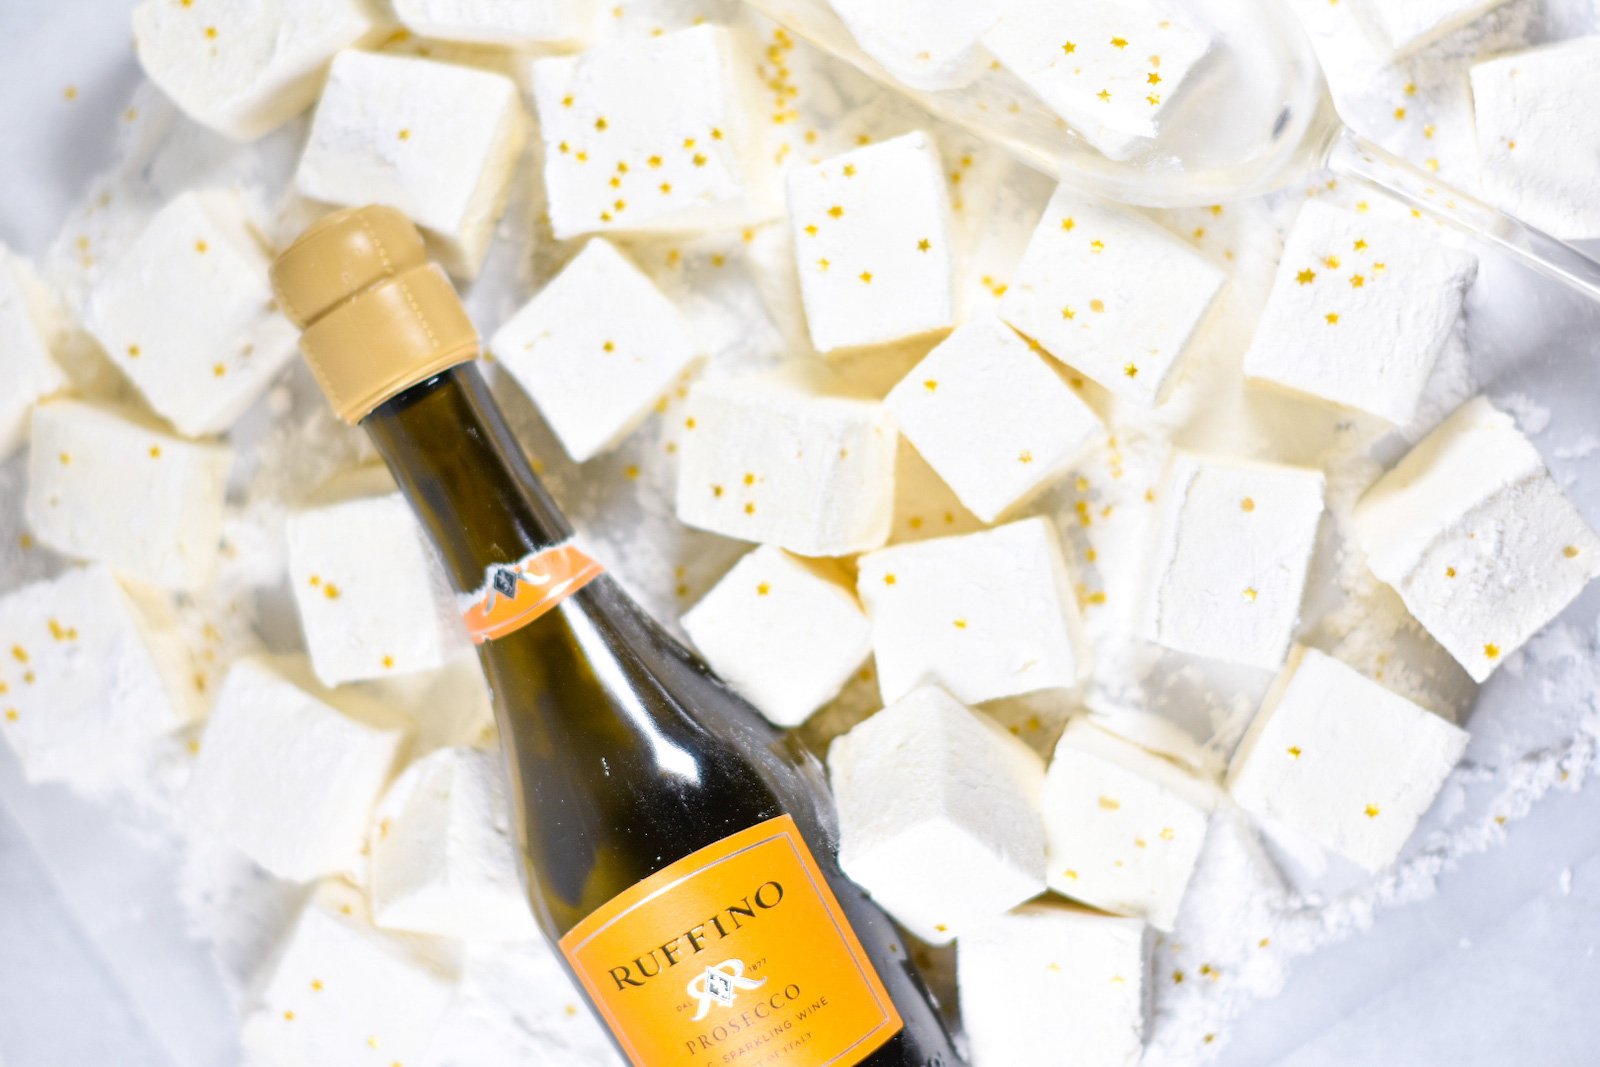 homemade marshmallows and a bottle of prosecco on a white surface